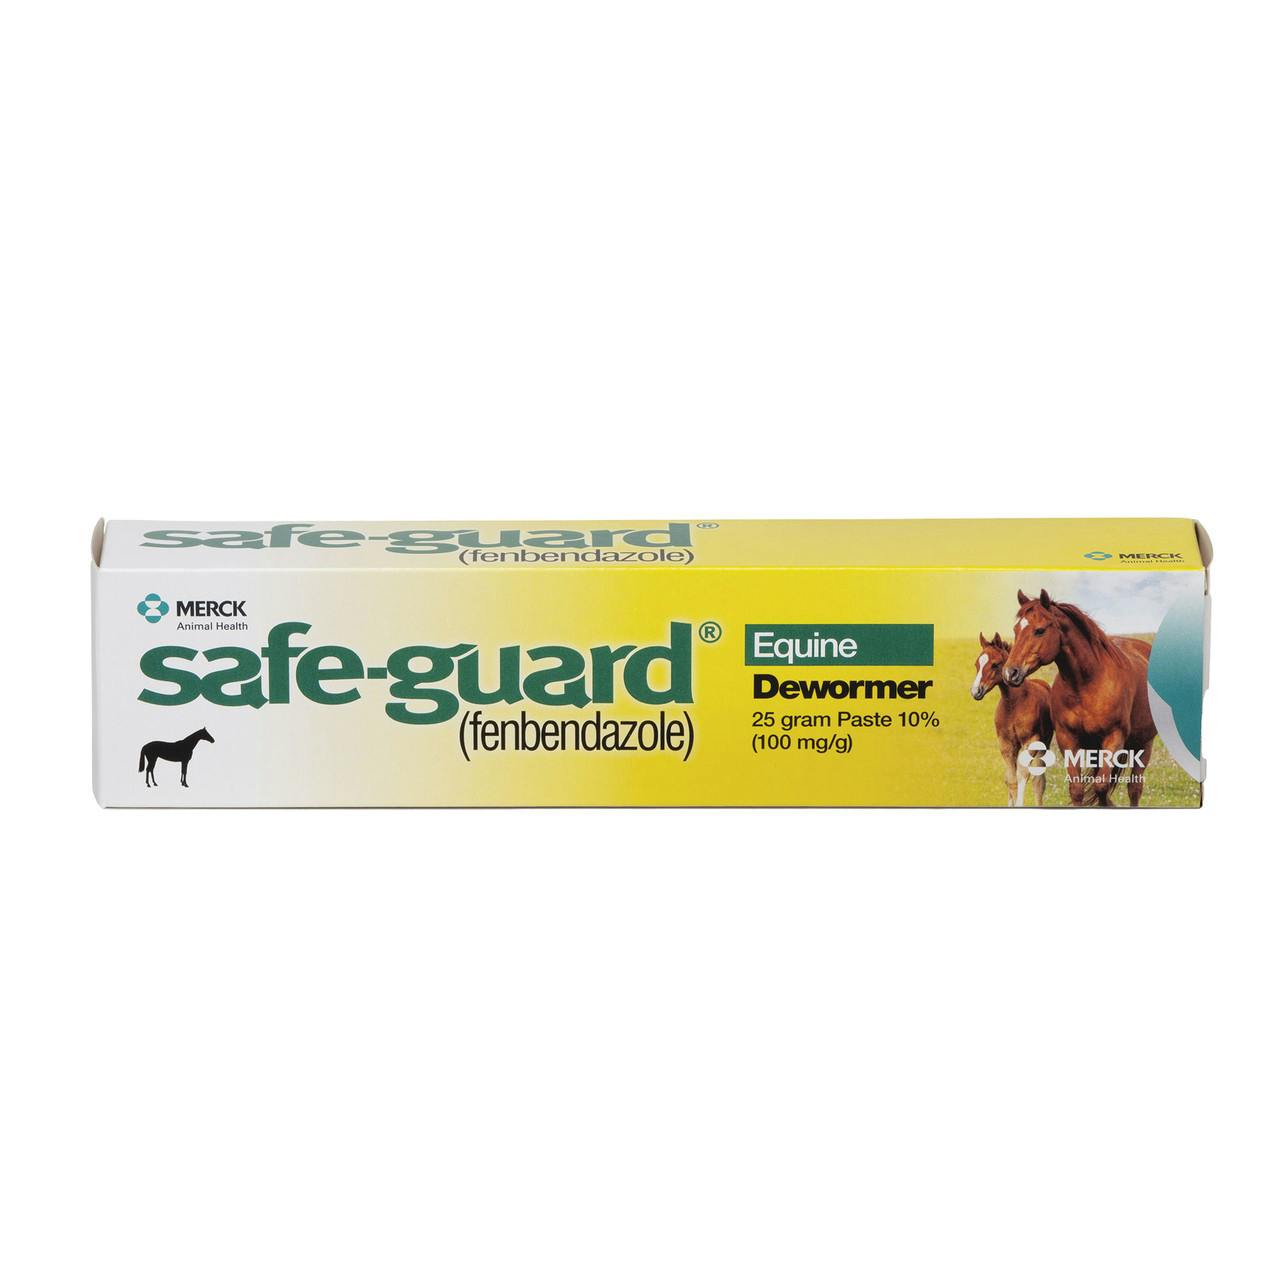 A yellow & green box has images of horses on it. It says "Safe-guard Equine Dewormer"